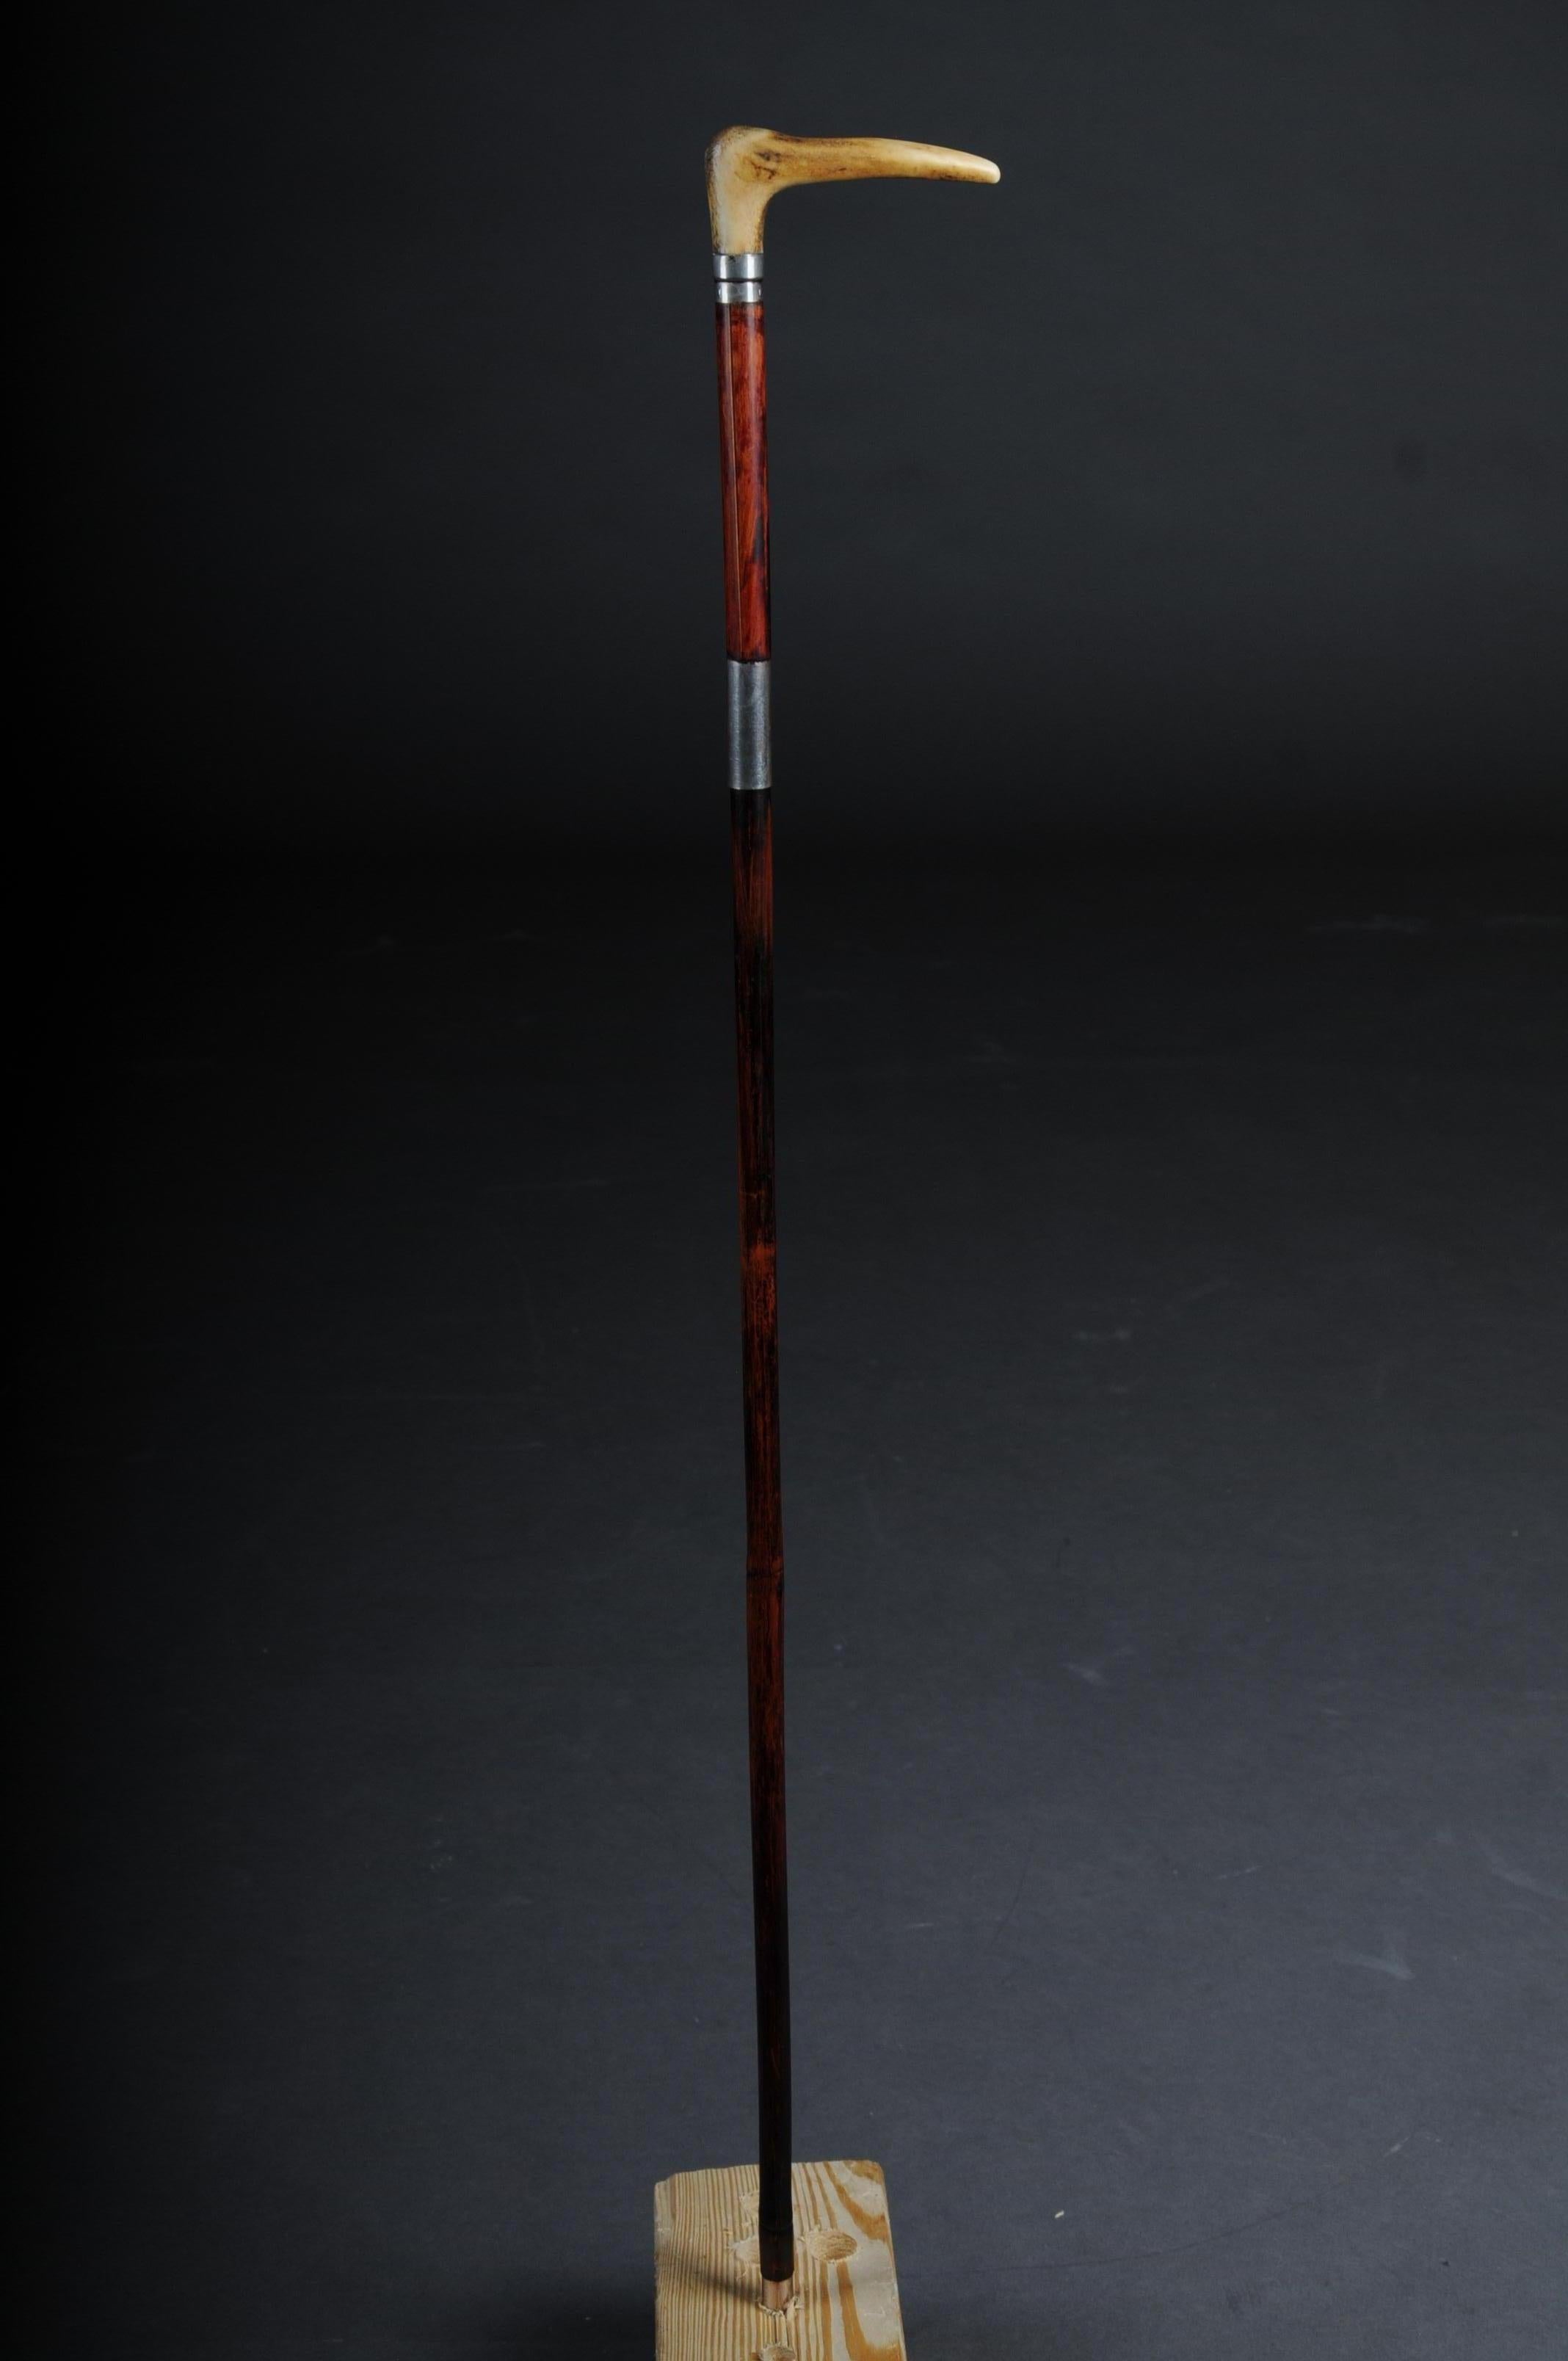 Antique walking stick/cane, Germany with around 1910

Antique historical condition.
Please refer to the detailed photos for the condition

(V-221).